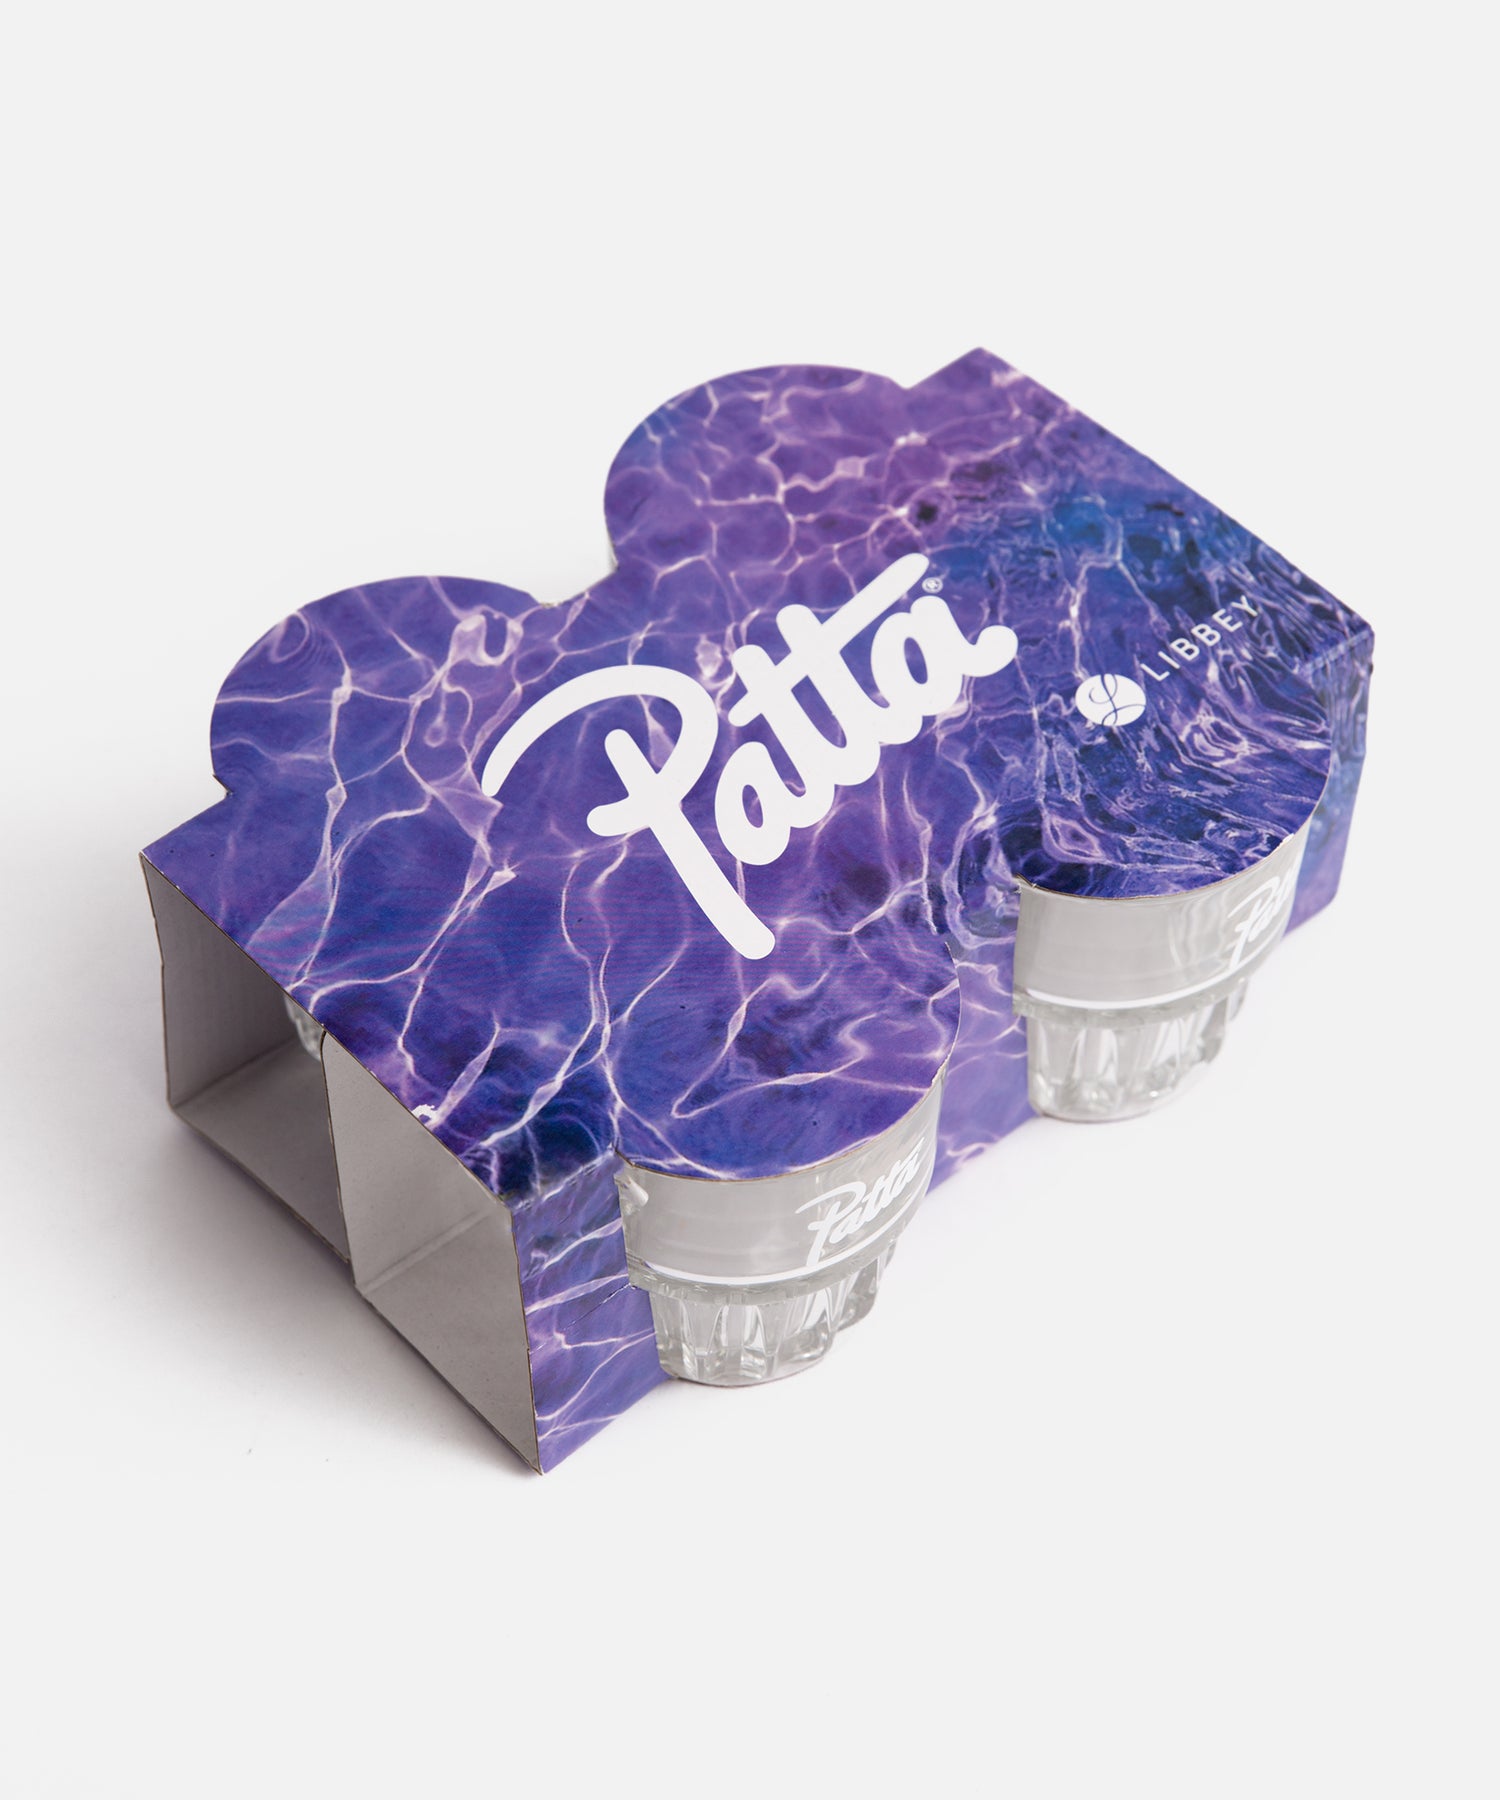 Patta x Libbey Everest Glass 4-Pack (Clear)